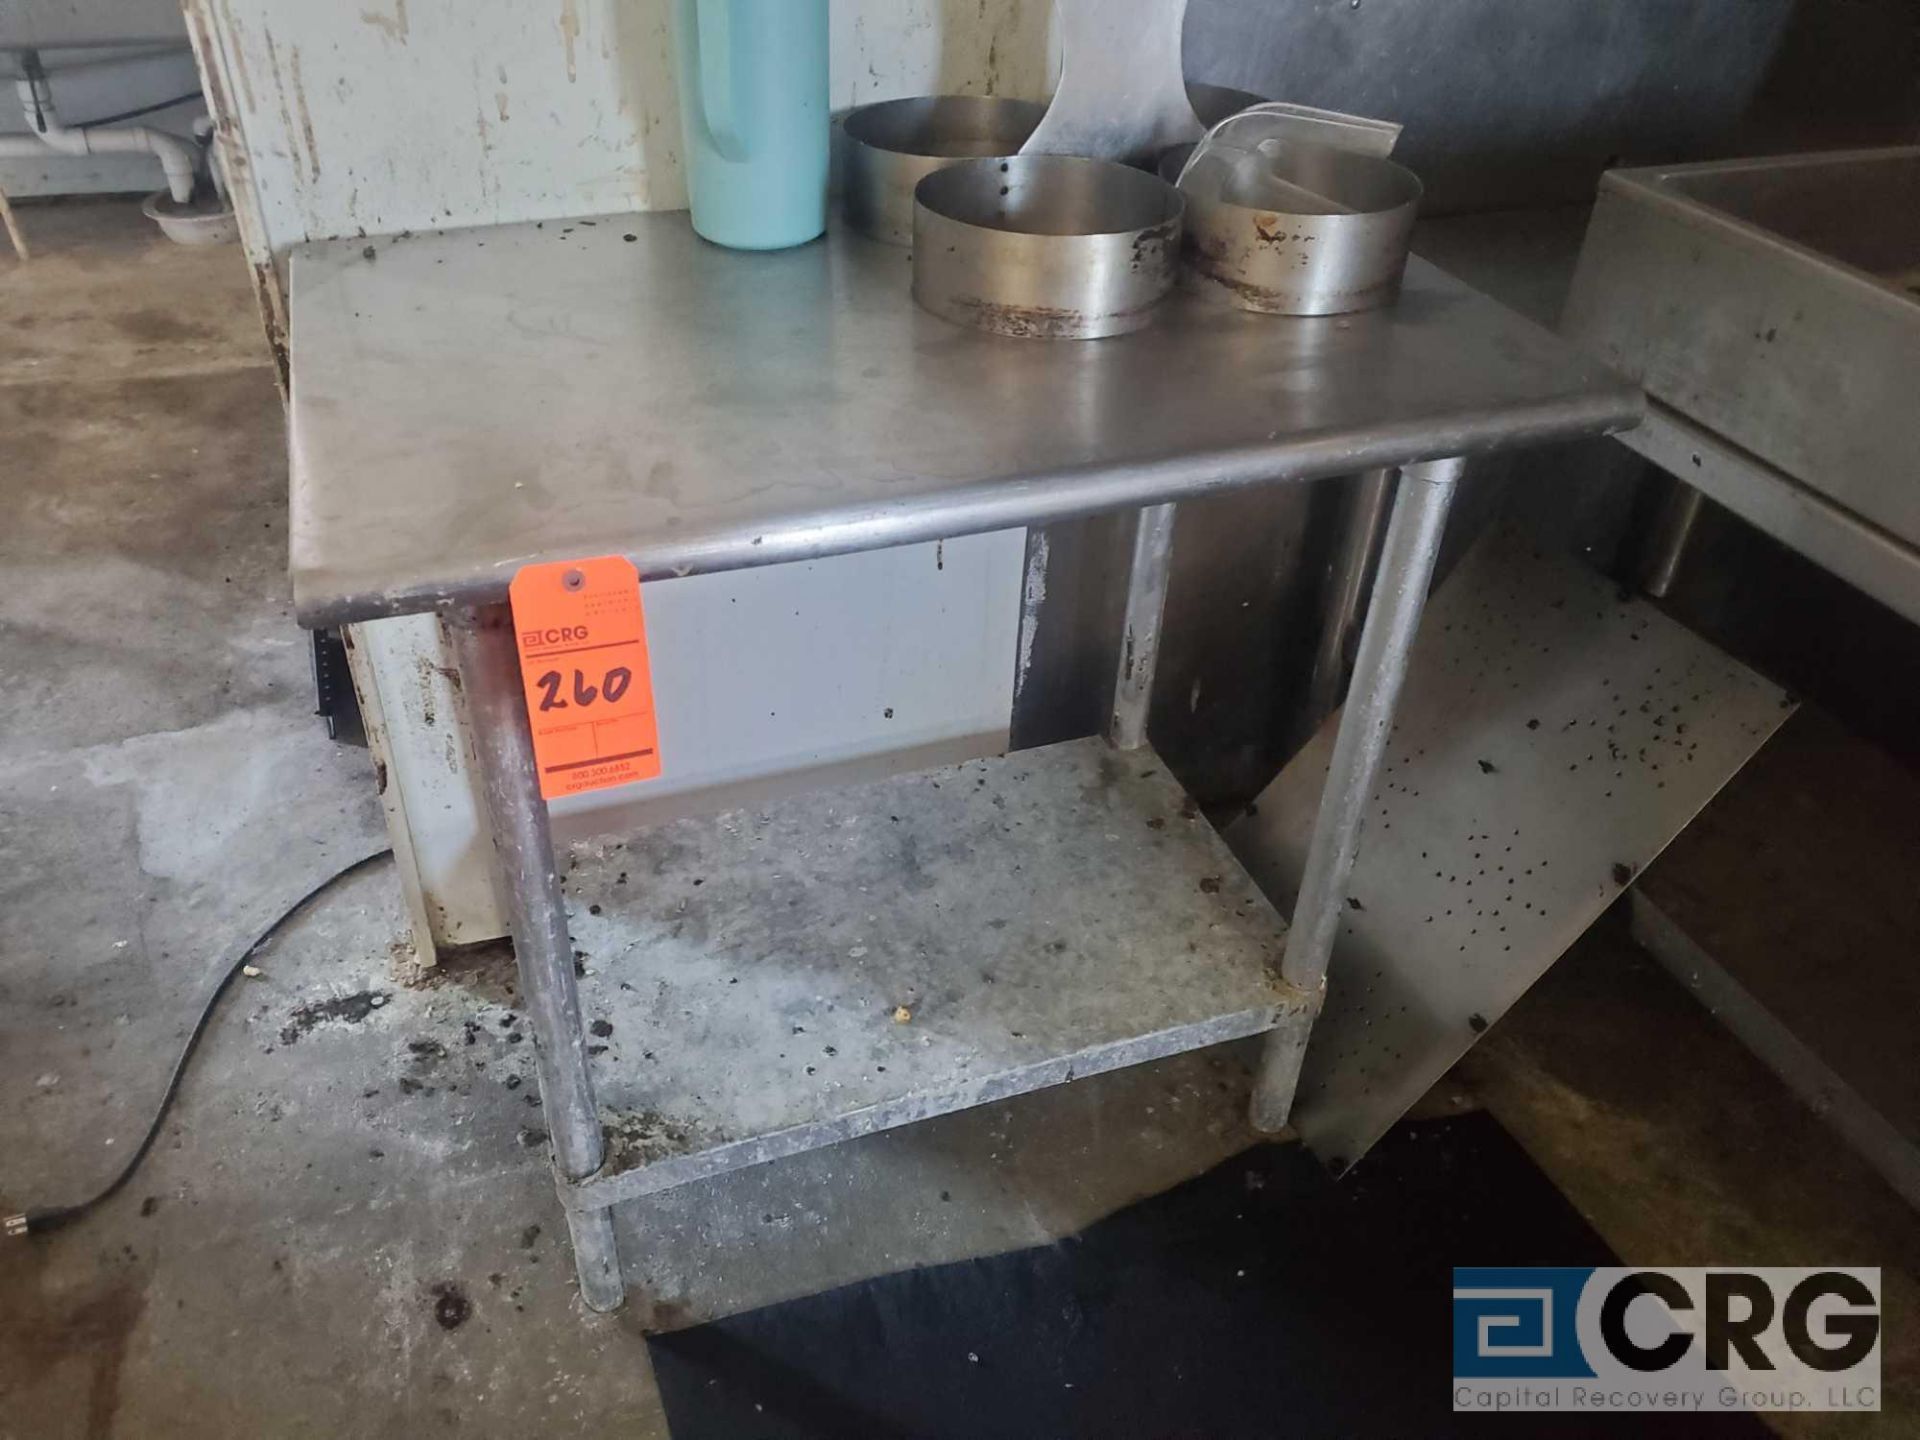 Lot of (4) asst stainless steel work tables including (2) 5 foot, (1) 4 foot and (1) 3 foot - Image 4 of 4